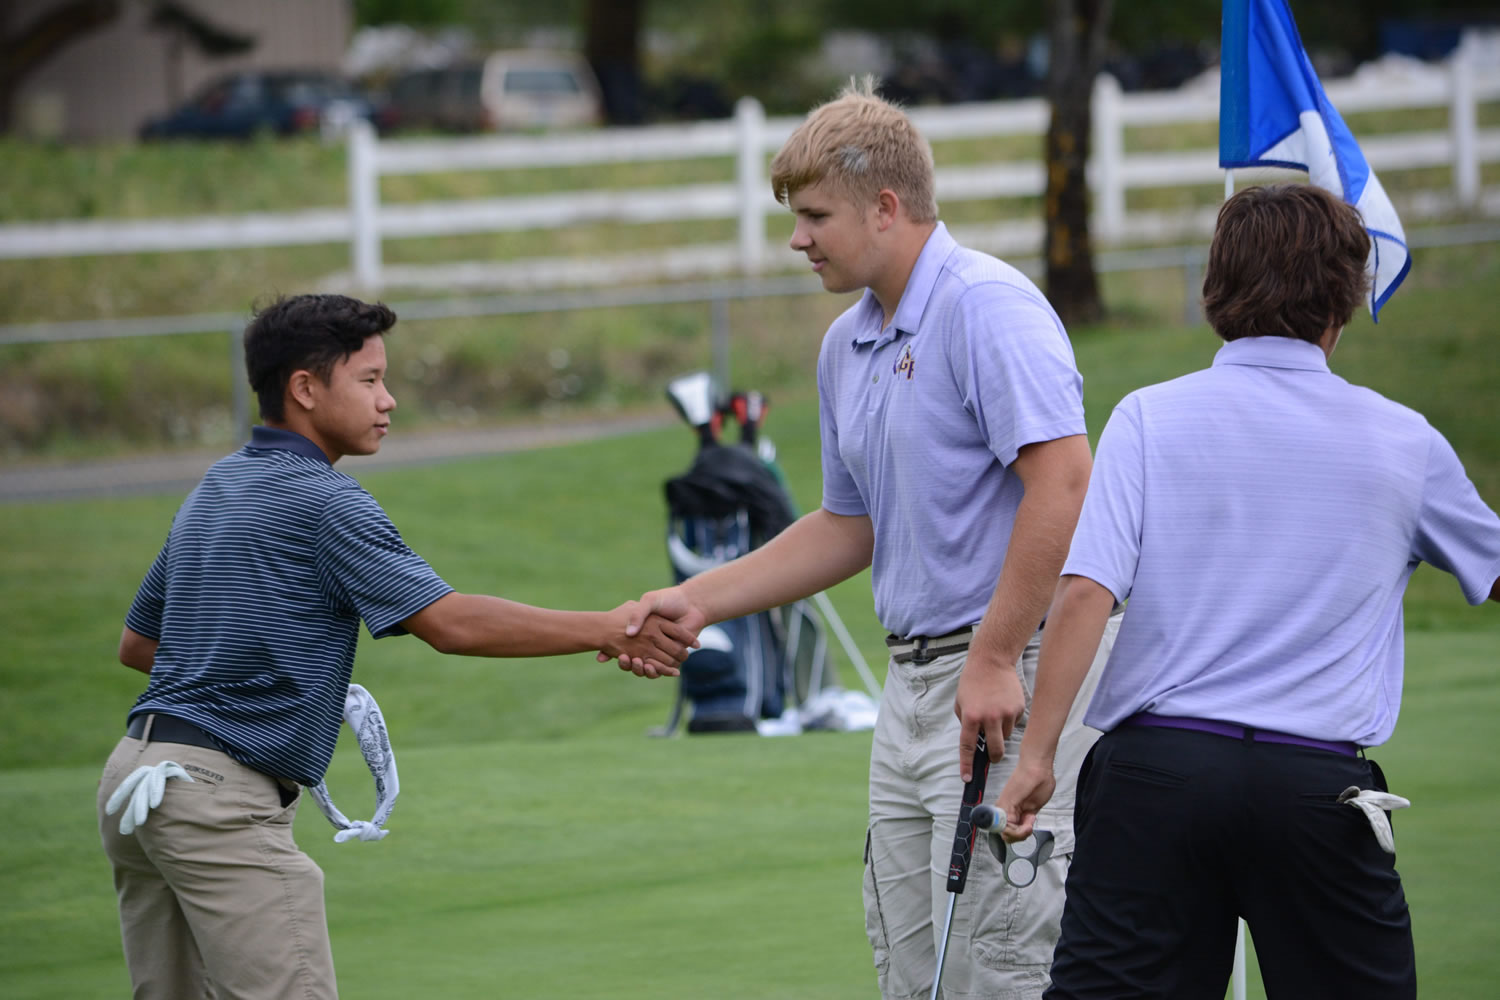 Skyview's Zach Peros, left, and Columbia River's Spencer Long shake hands after completing their round Tuesday at Tri-Mountain Golf Course. The teams tied at 158 in the first high school sports event of the season in Clark County.